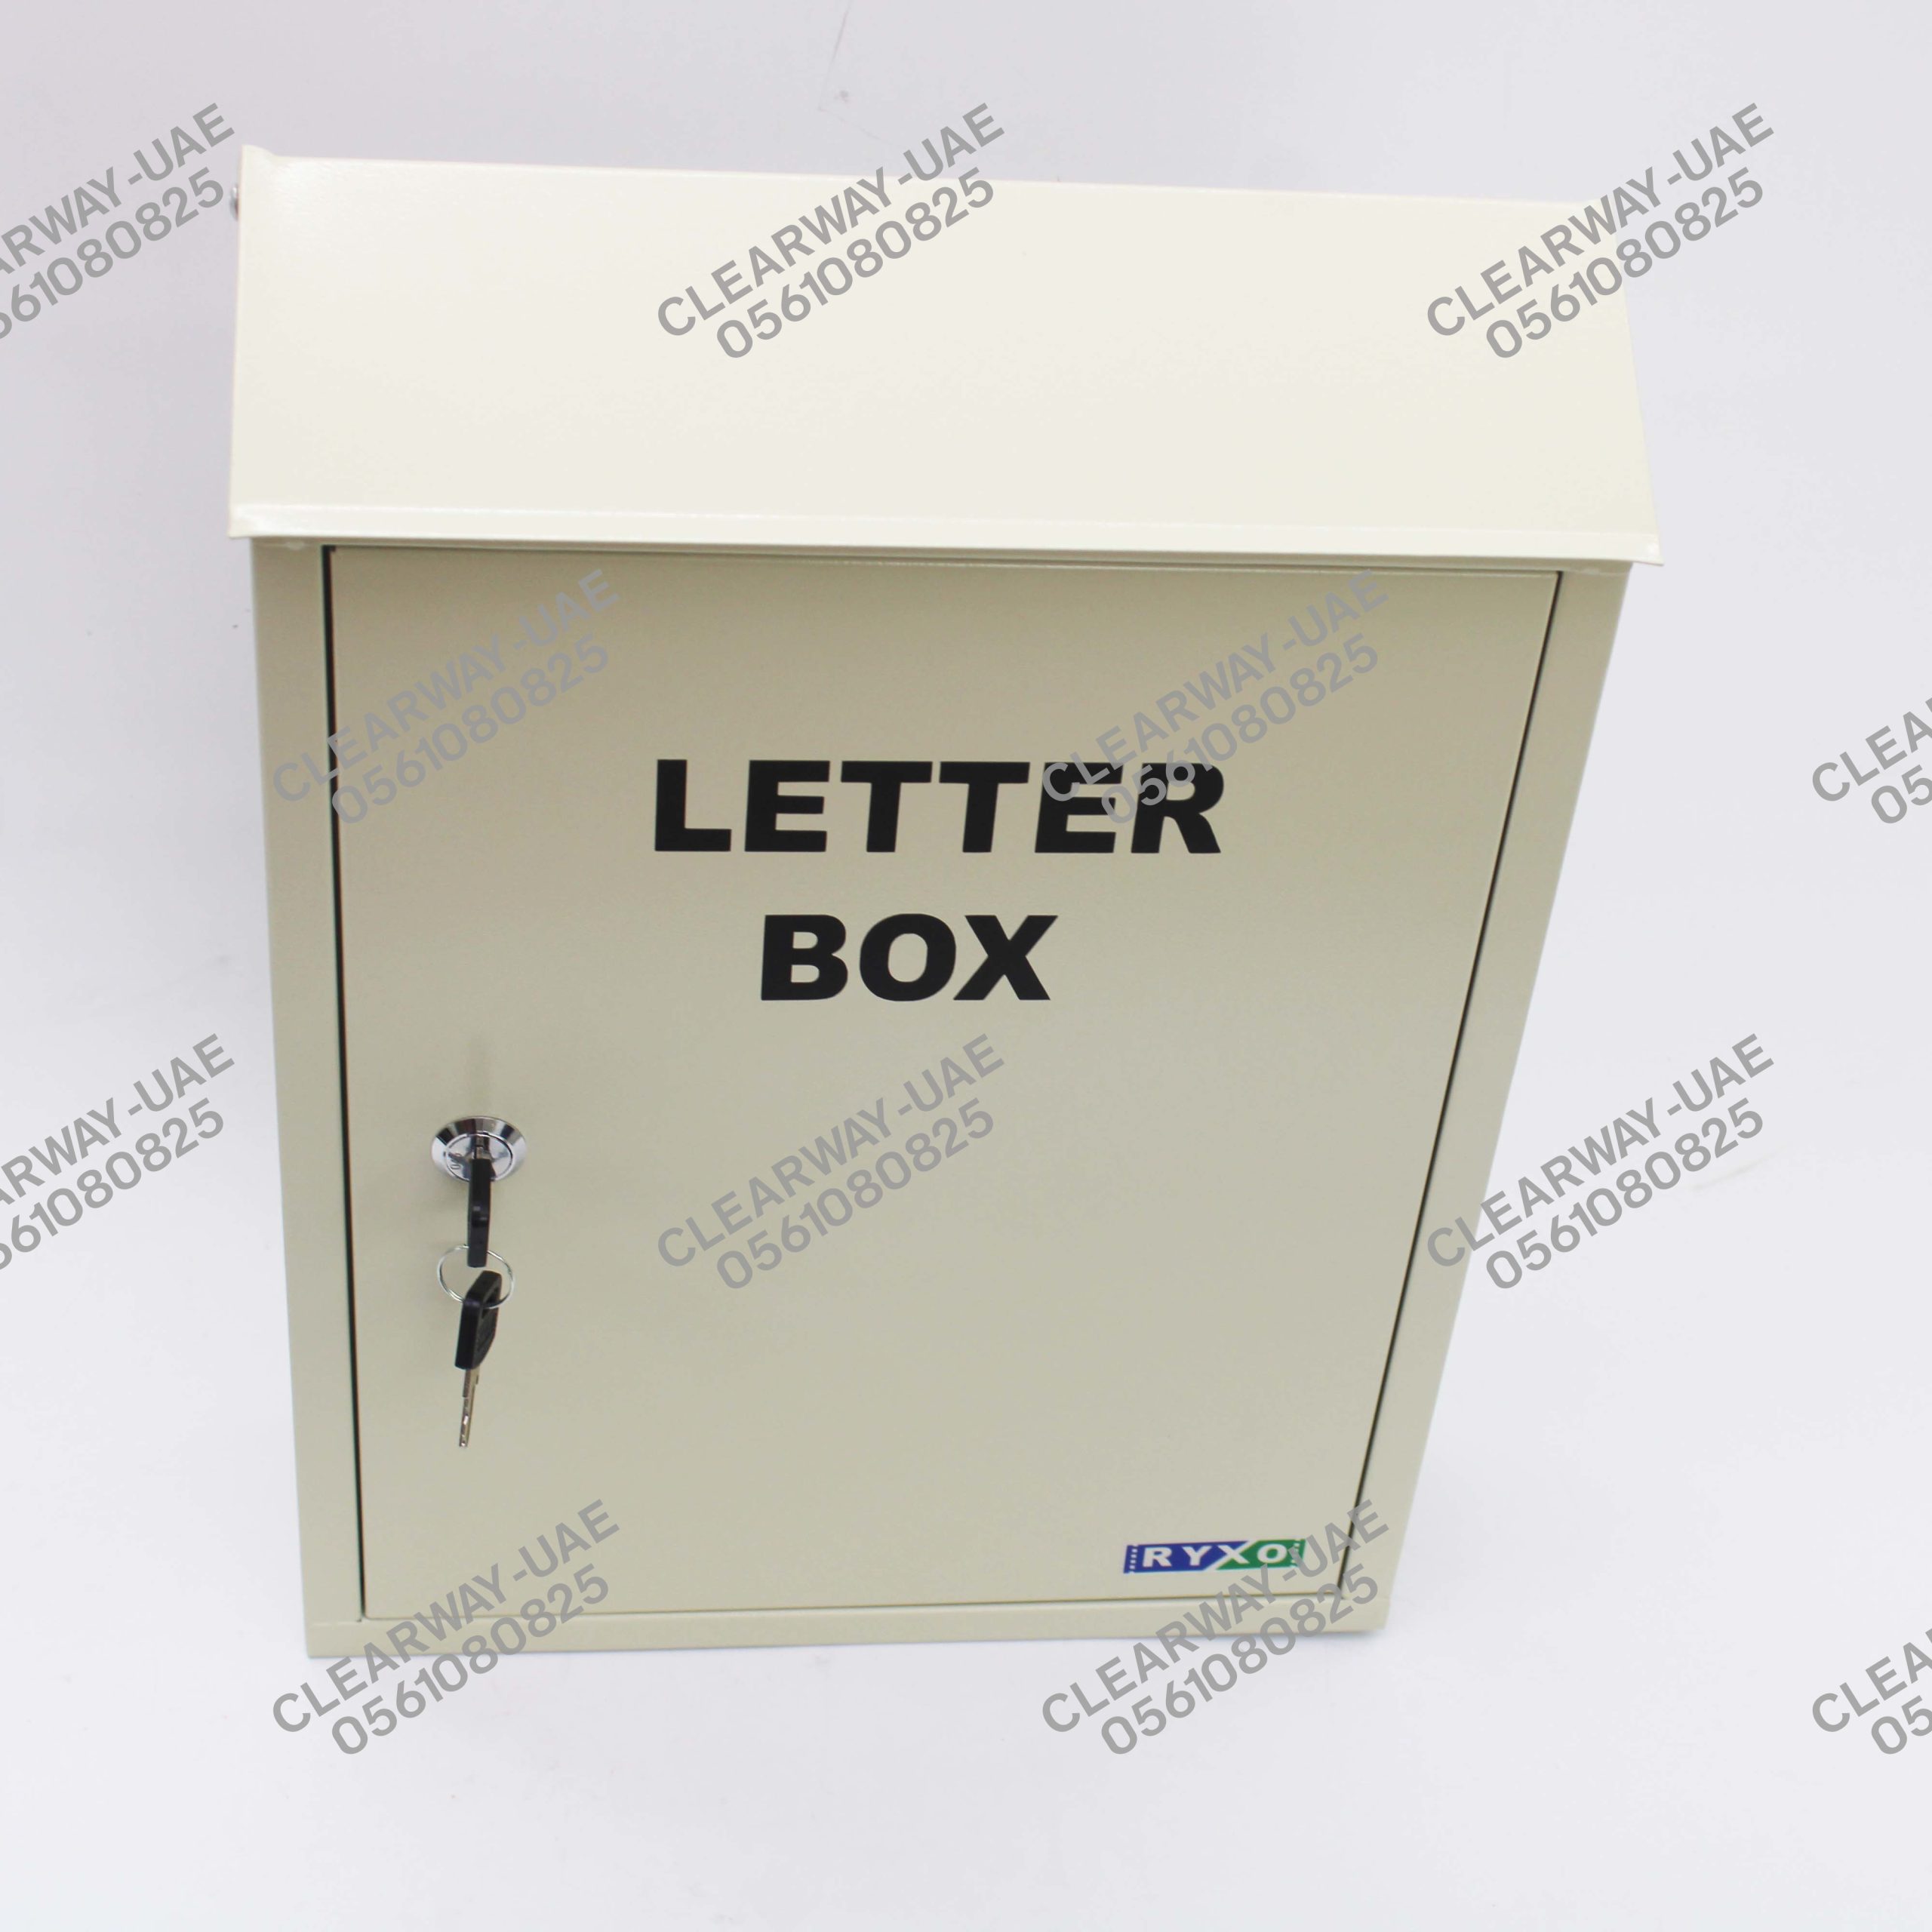 METAL LETTER BOX LARGE SUPPLIER UAE CLEARWAY RYXO SAFETY13